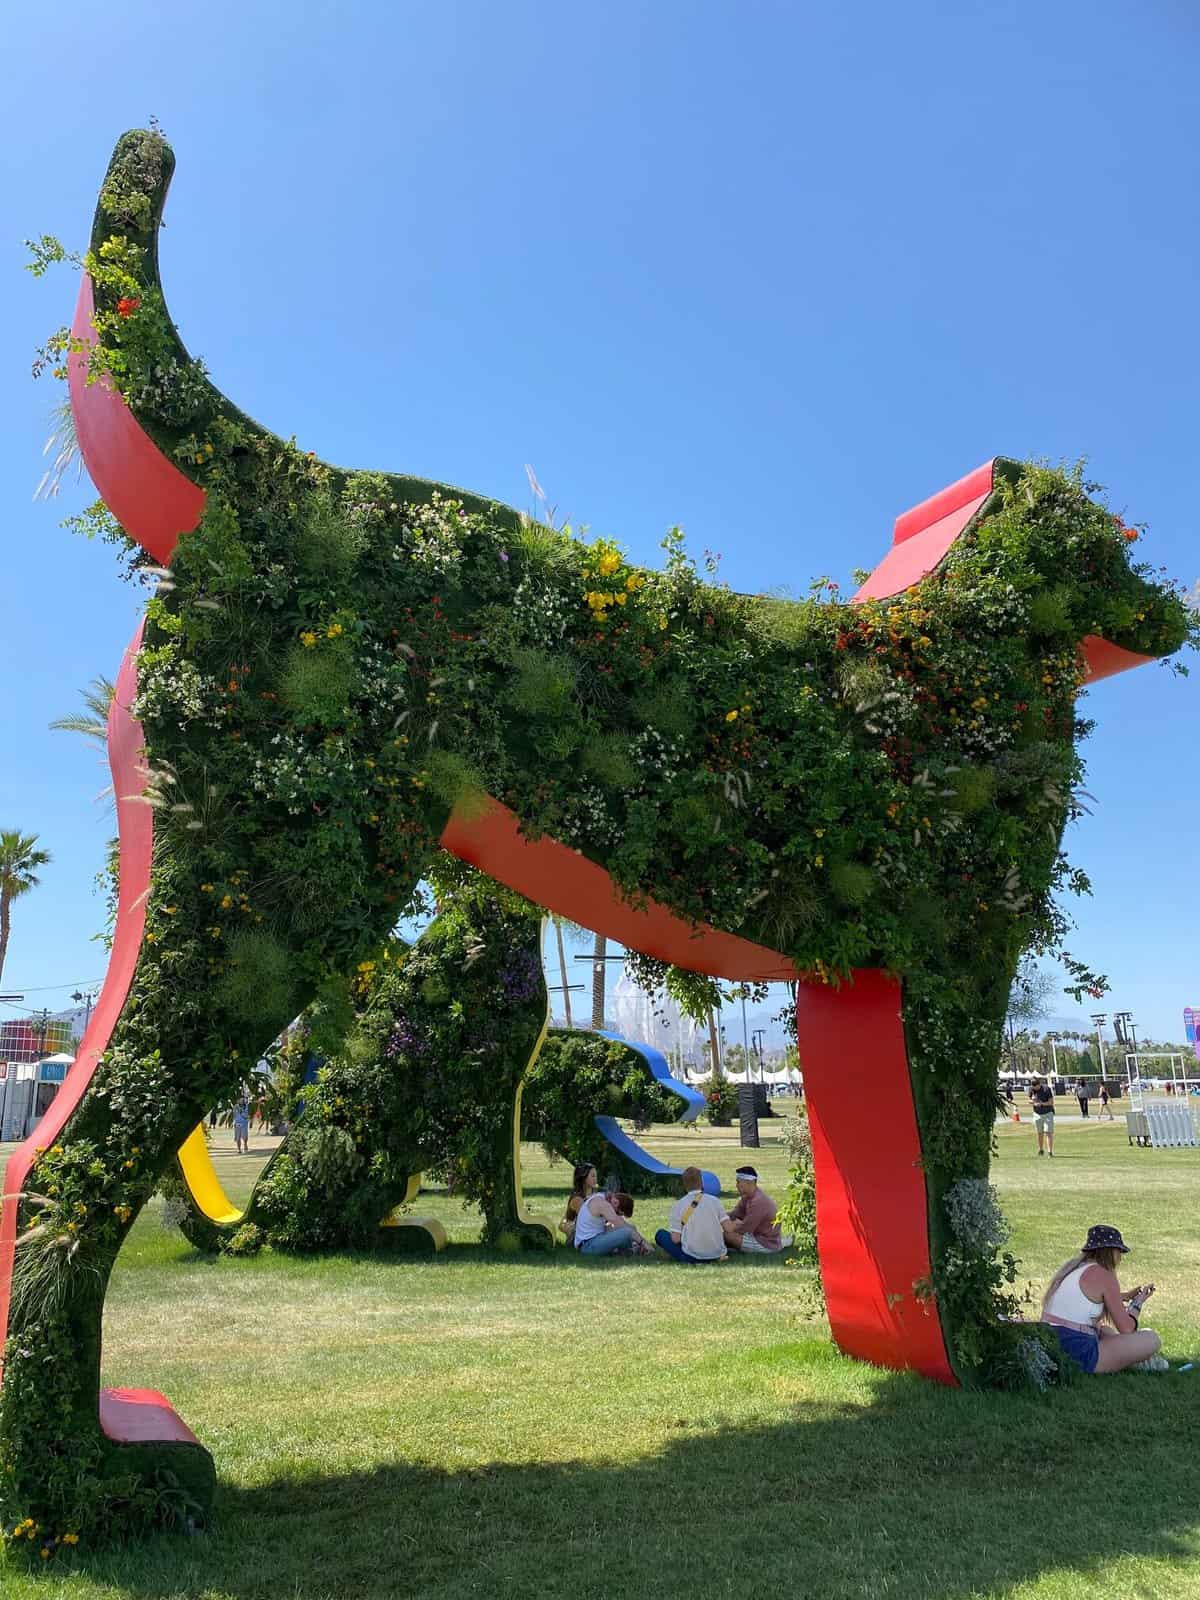 Dog art at Coachella dog standing in the sun metal and filled with ;plants.